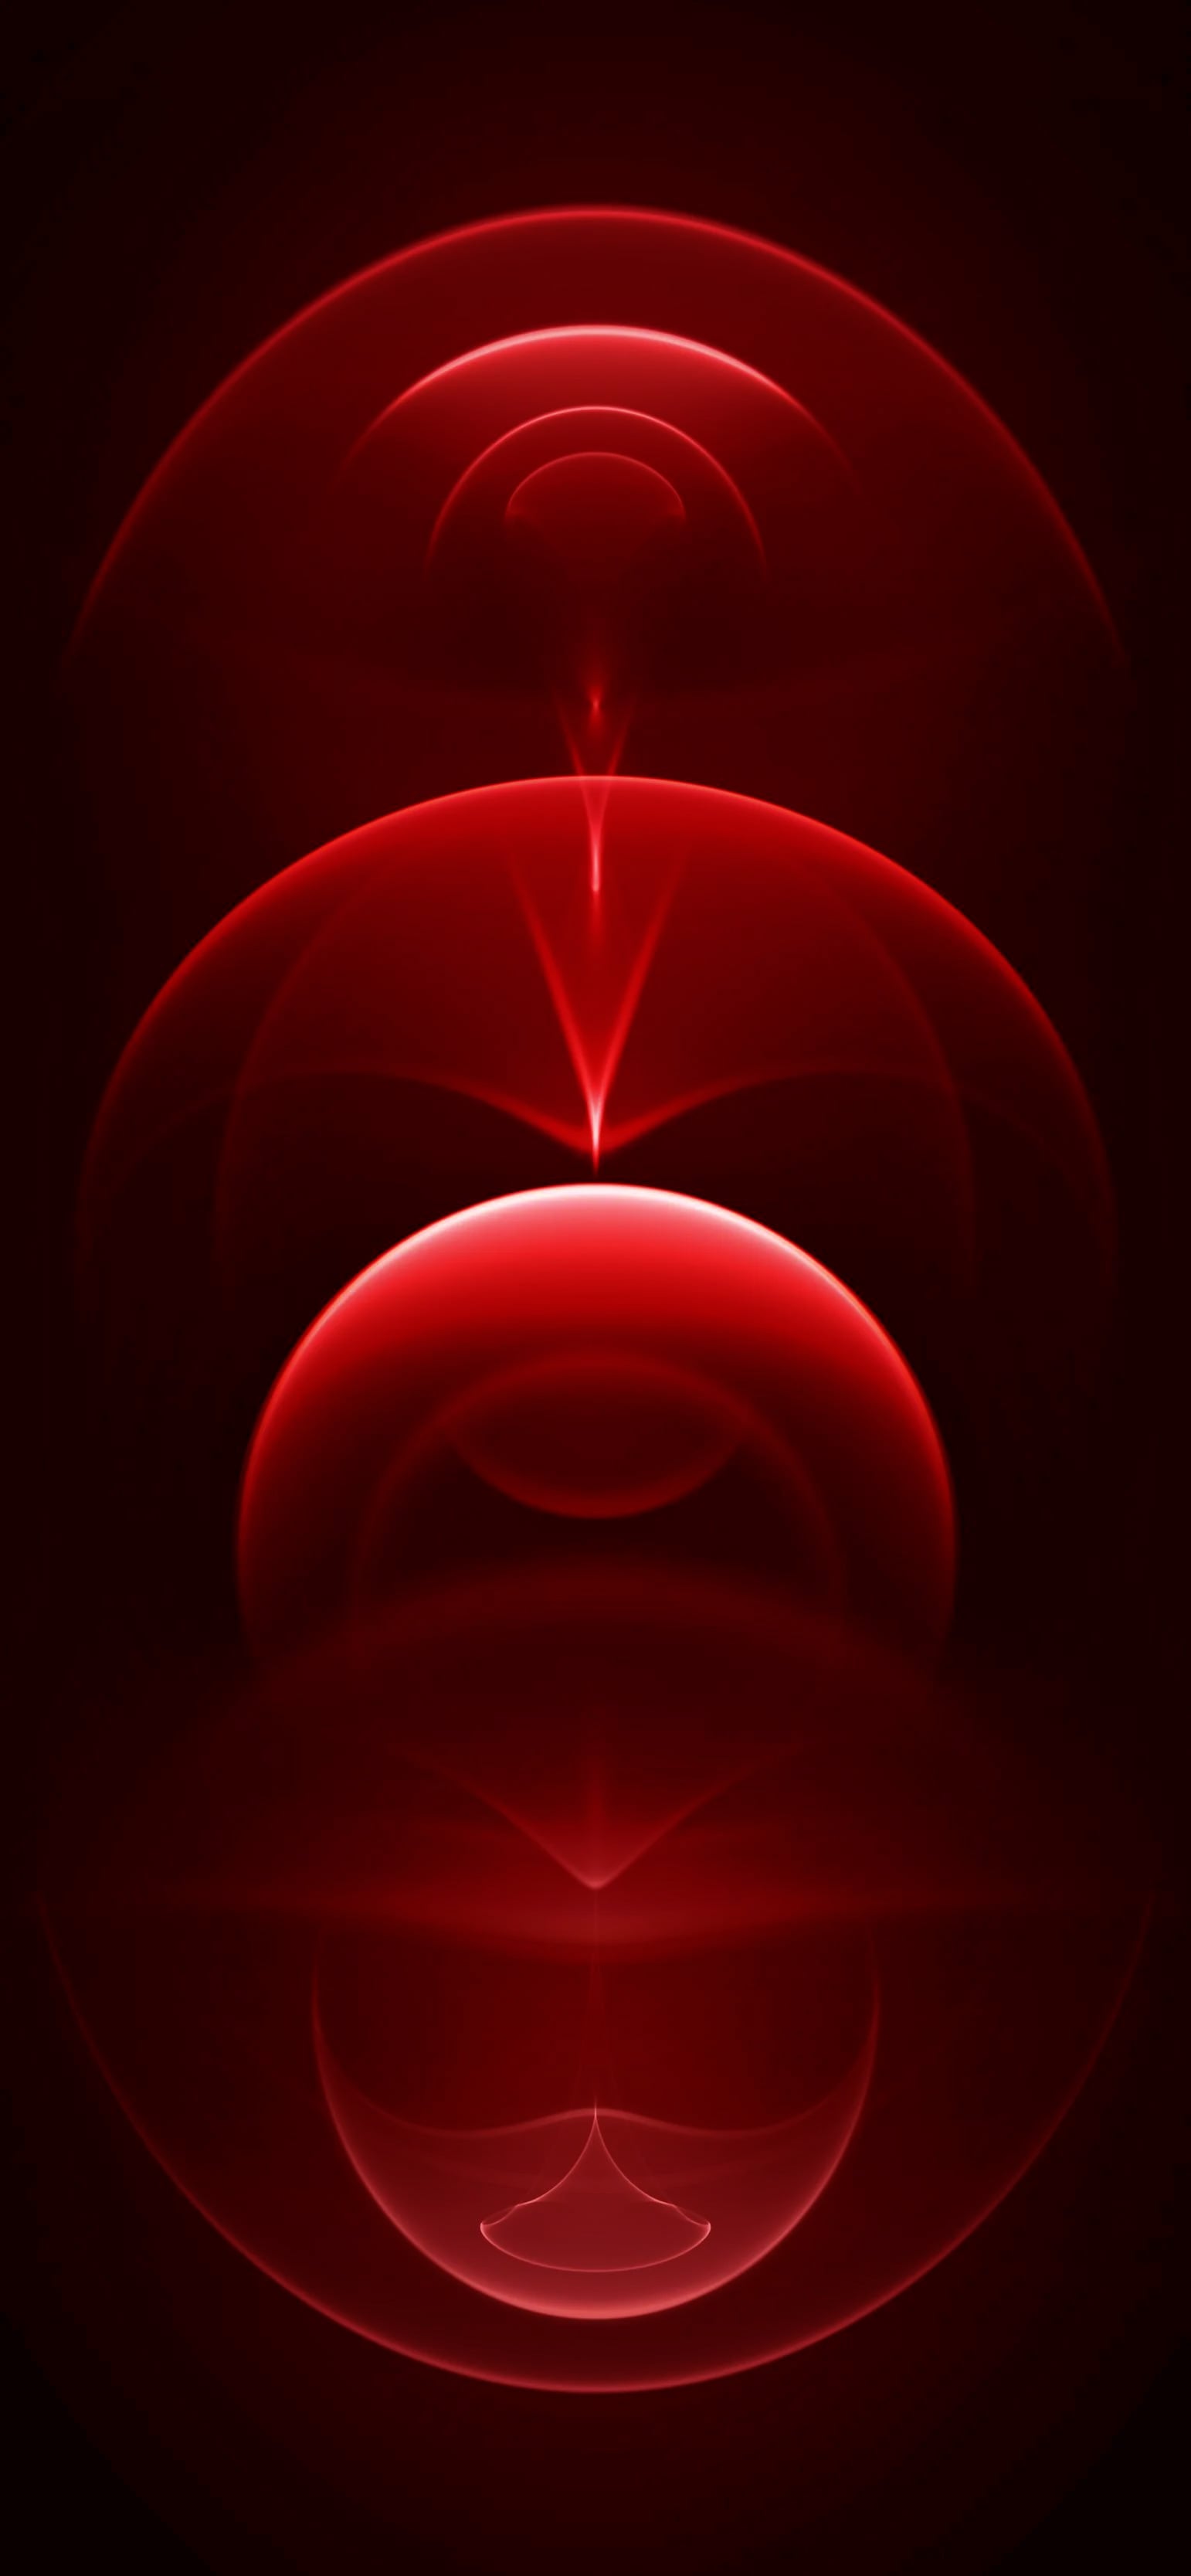 Red Iphone Wallpaper